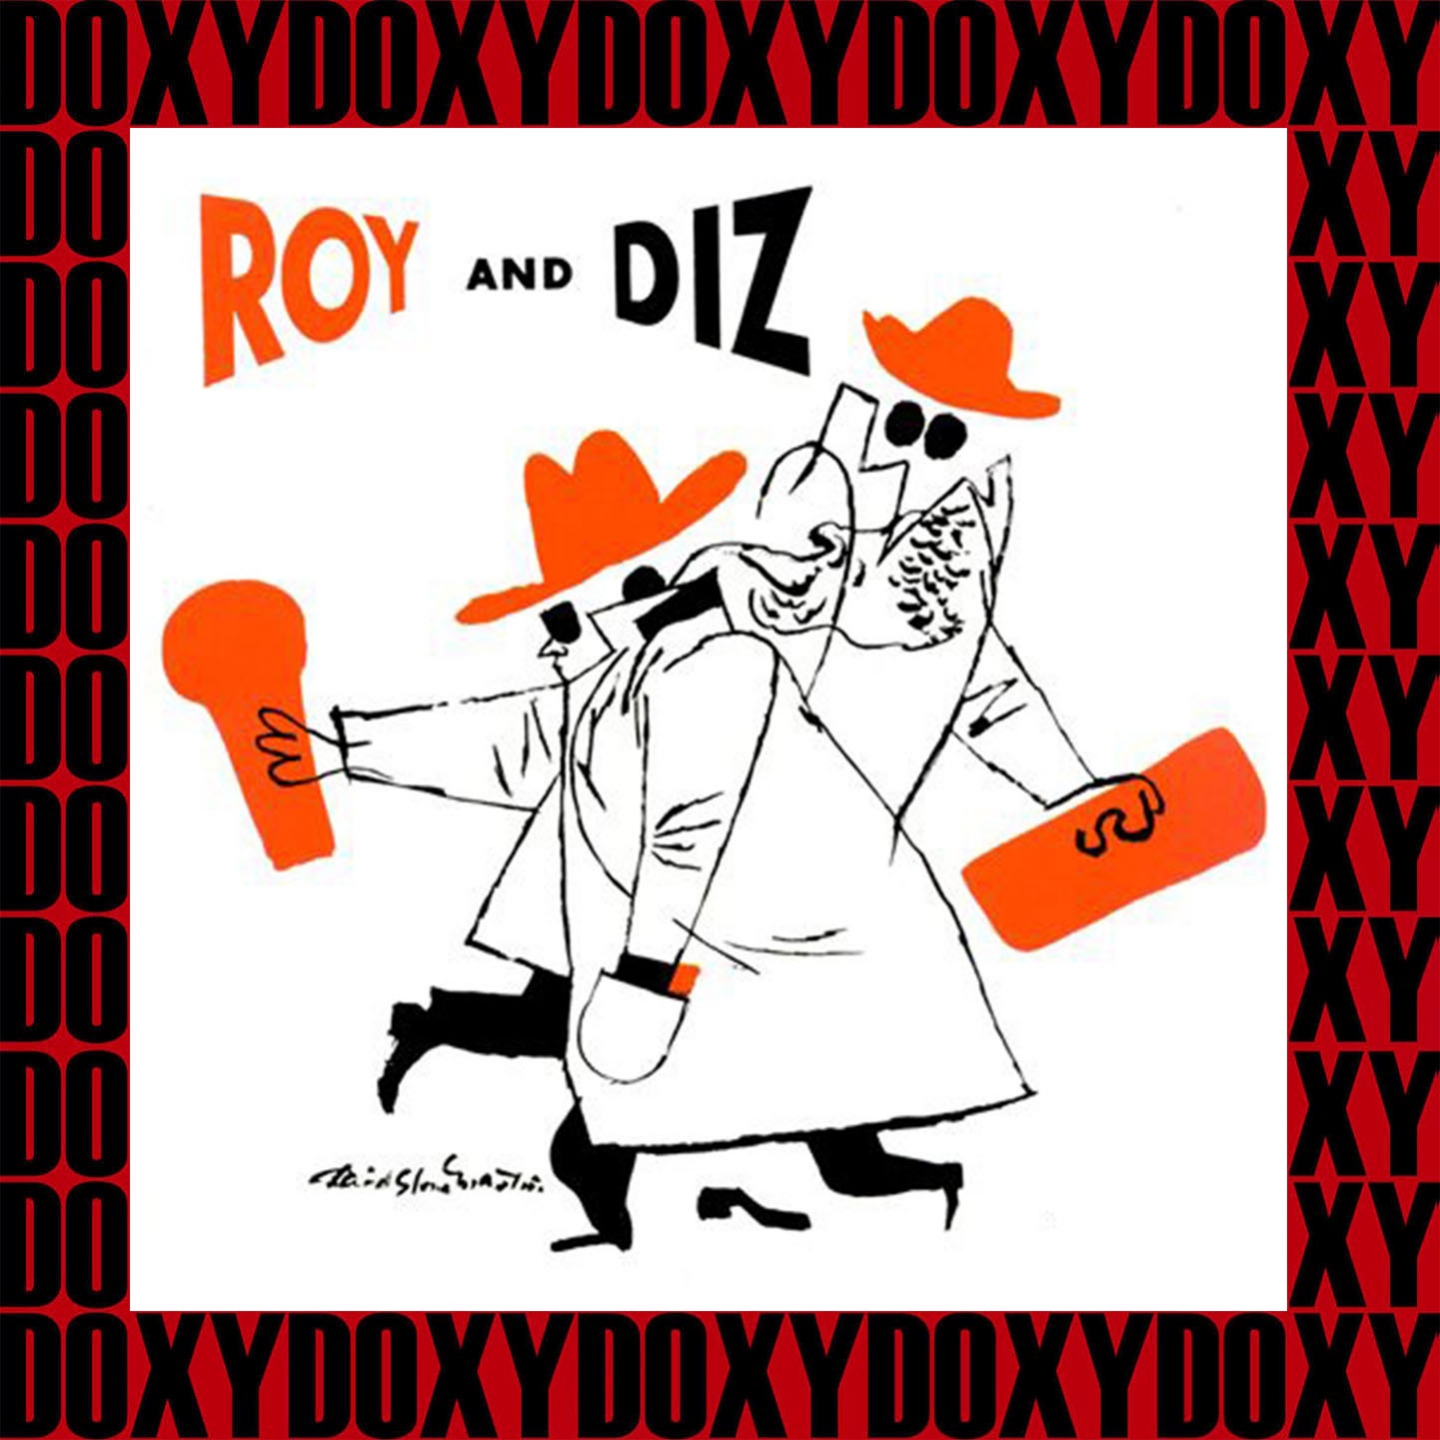 The Complete Roy And Diz Sessions (Remastered Version) (Doxy Collection)